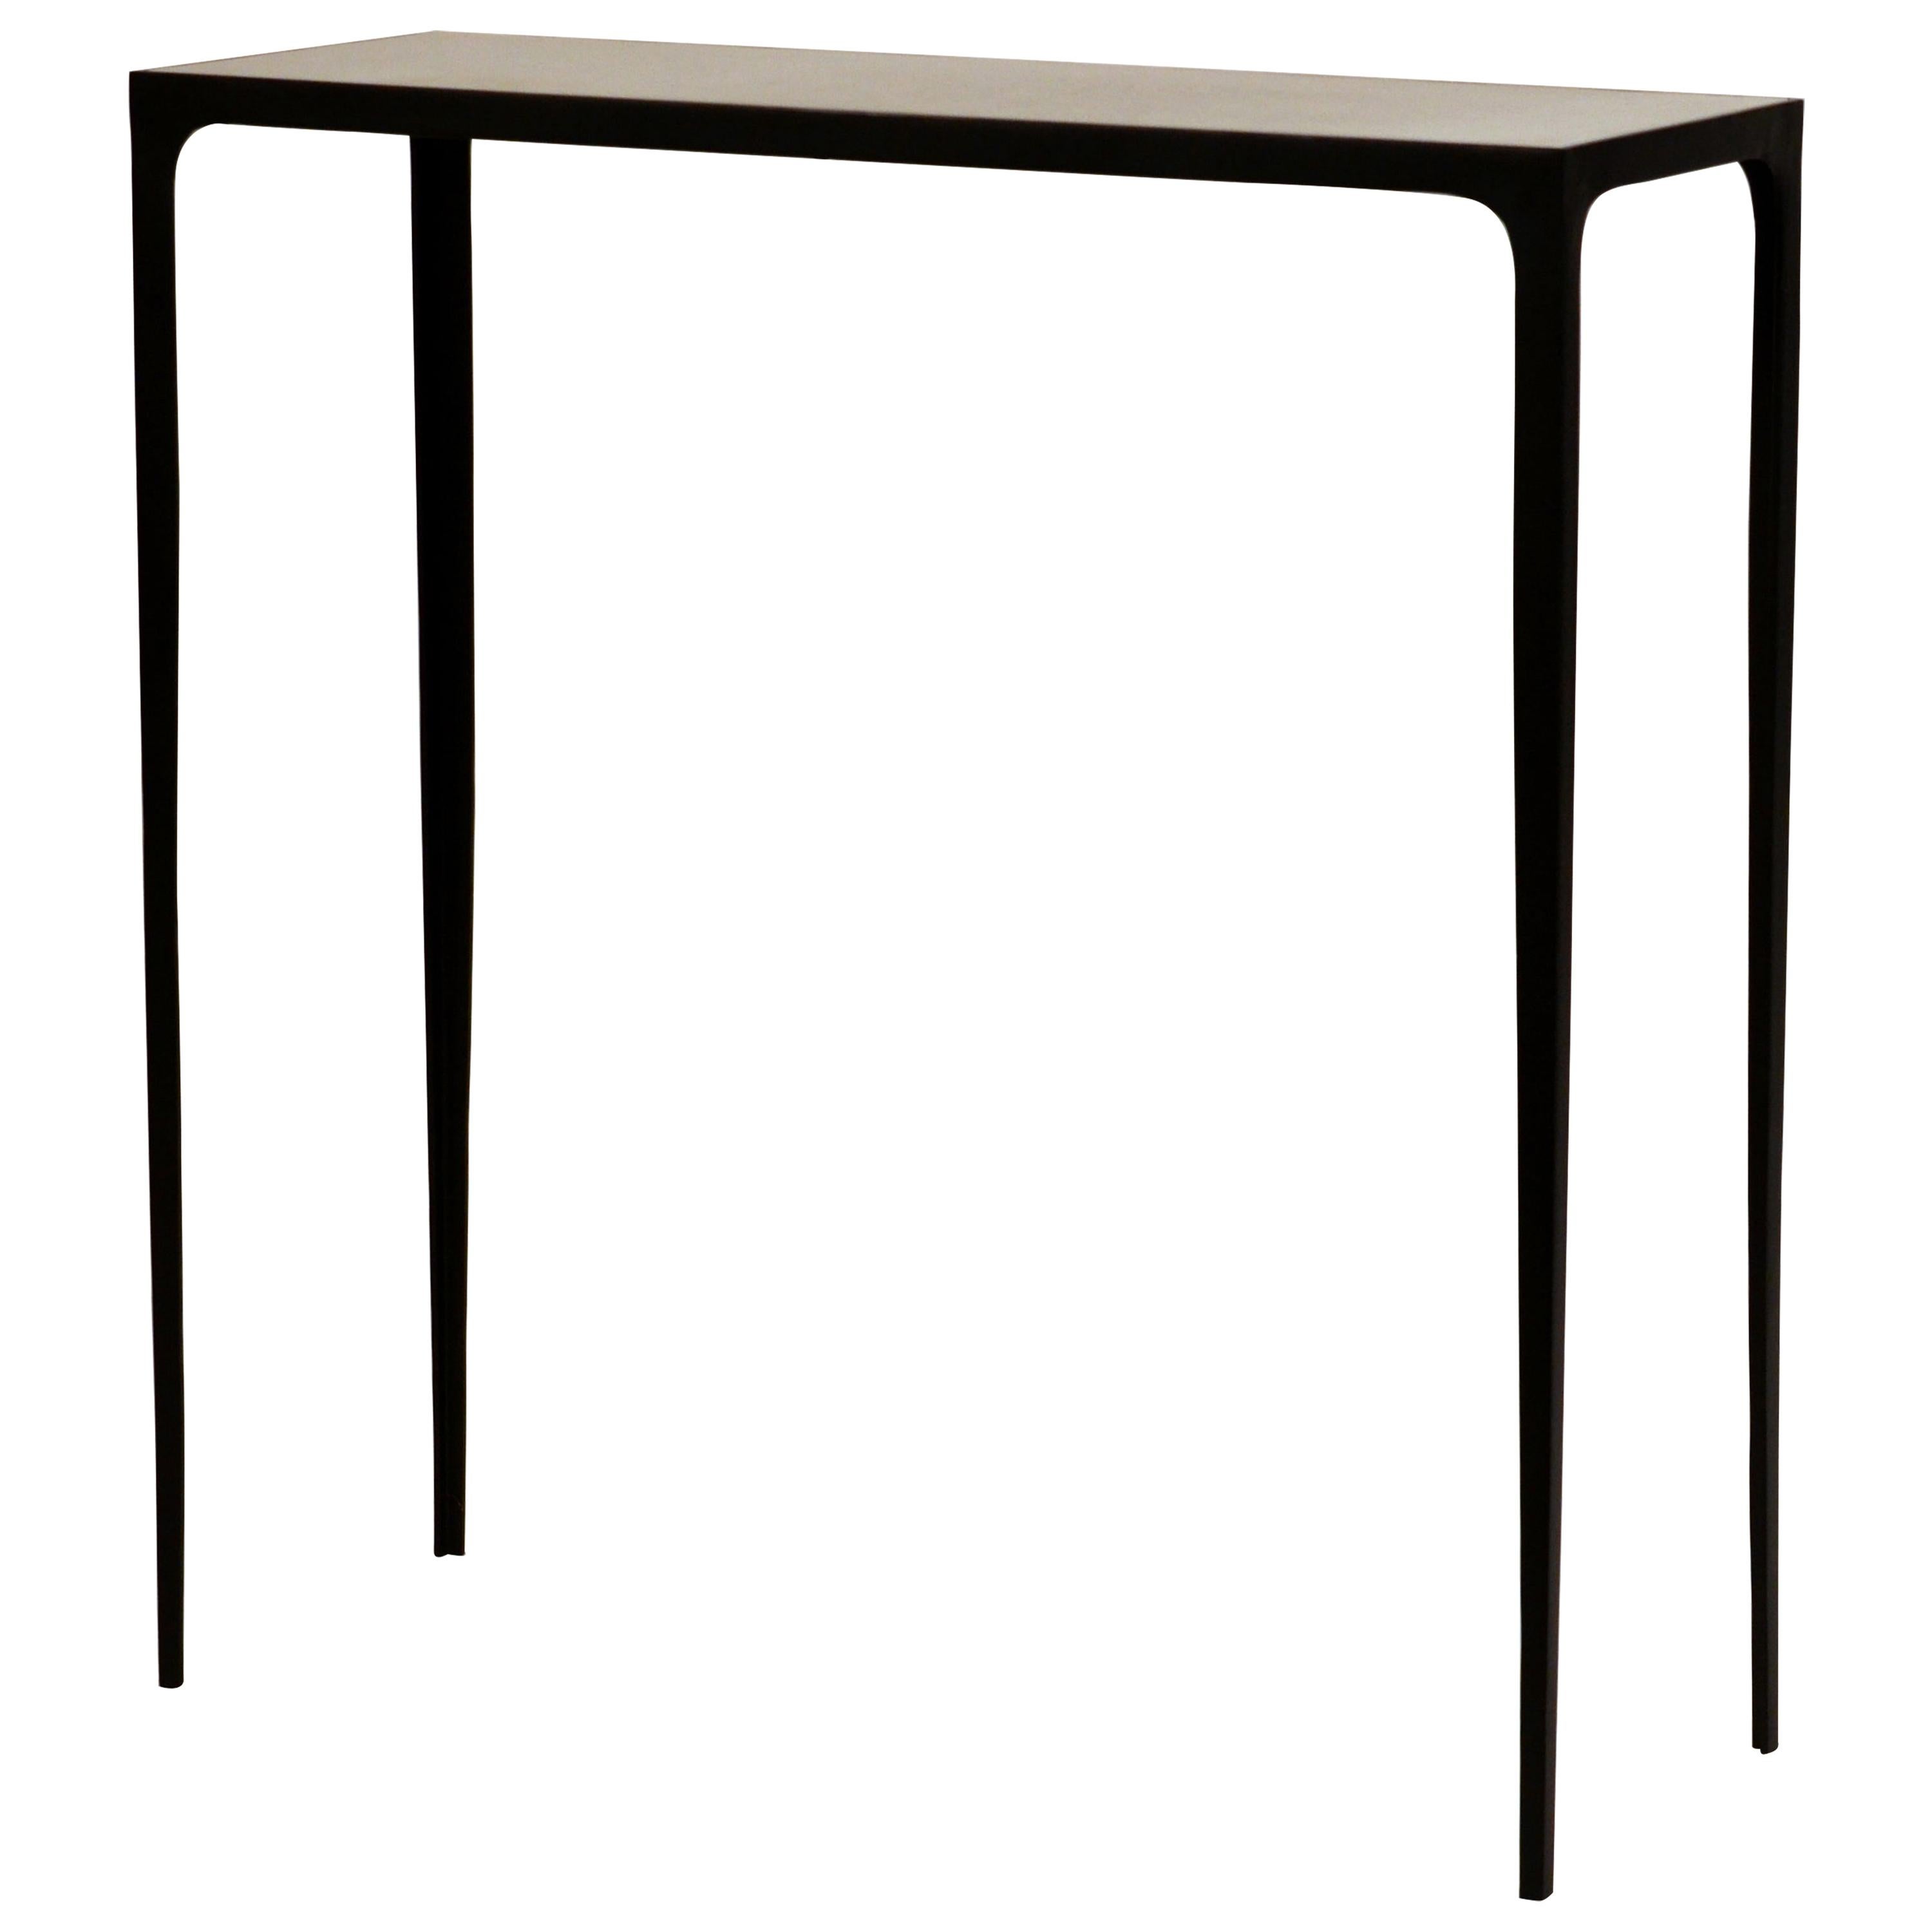 'Esquisse' Wrought Iron and Parchment Console by Design Frères